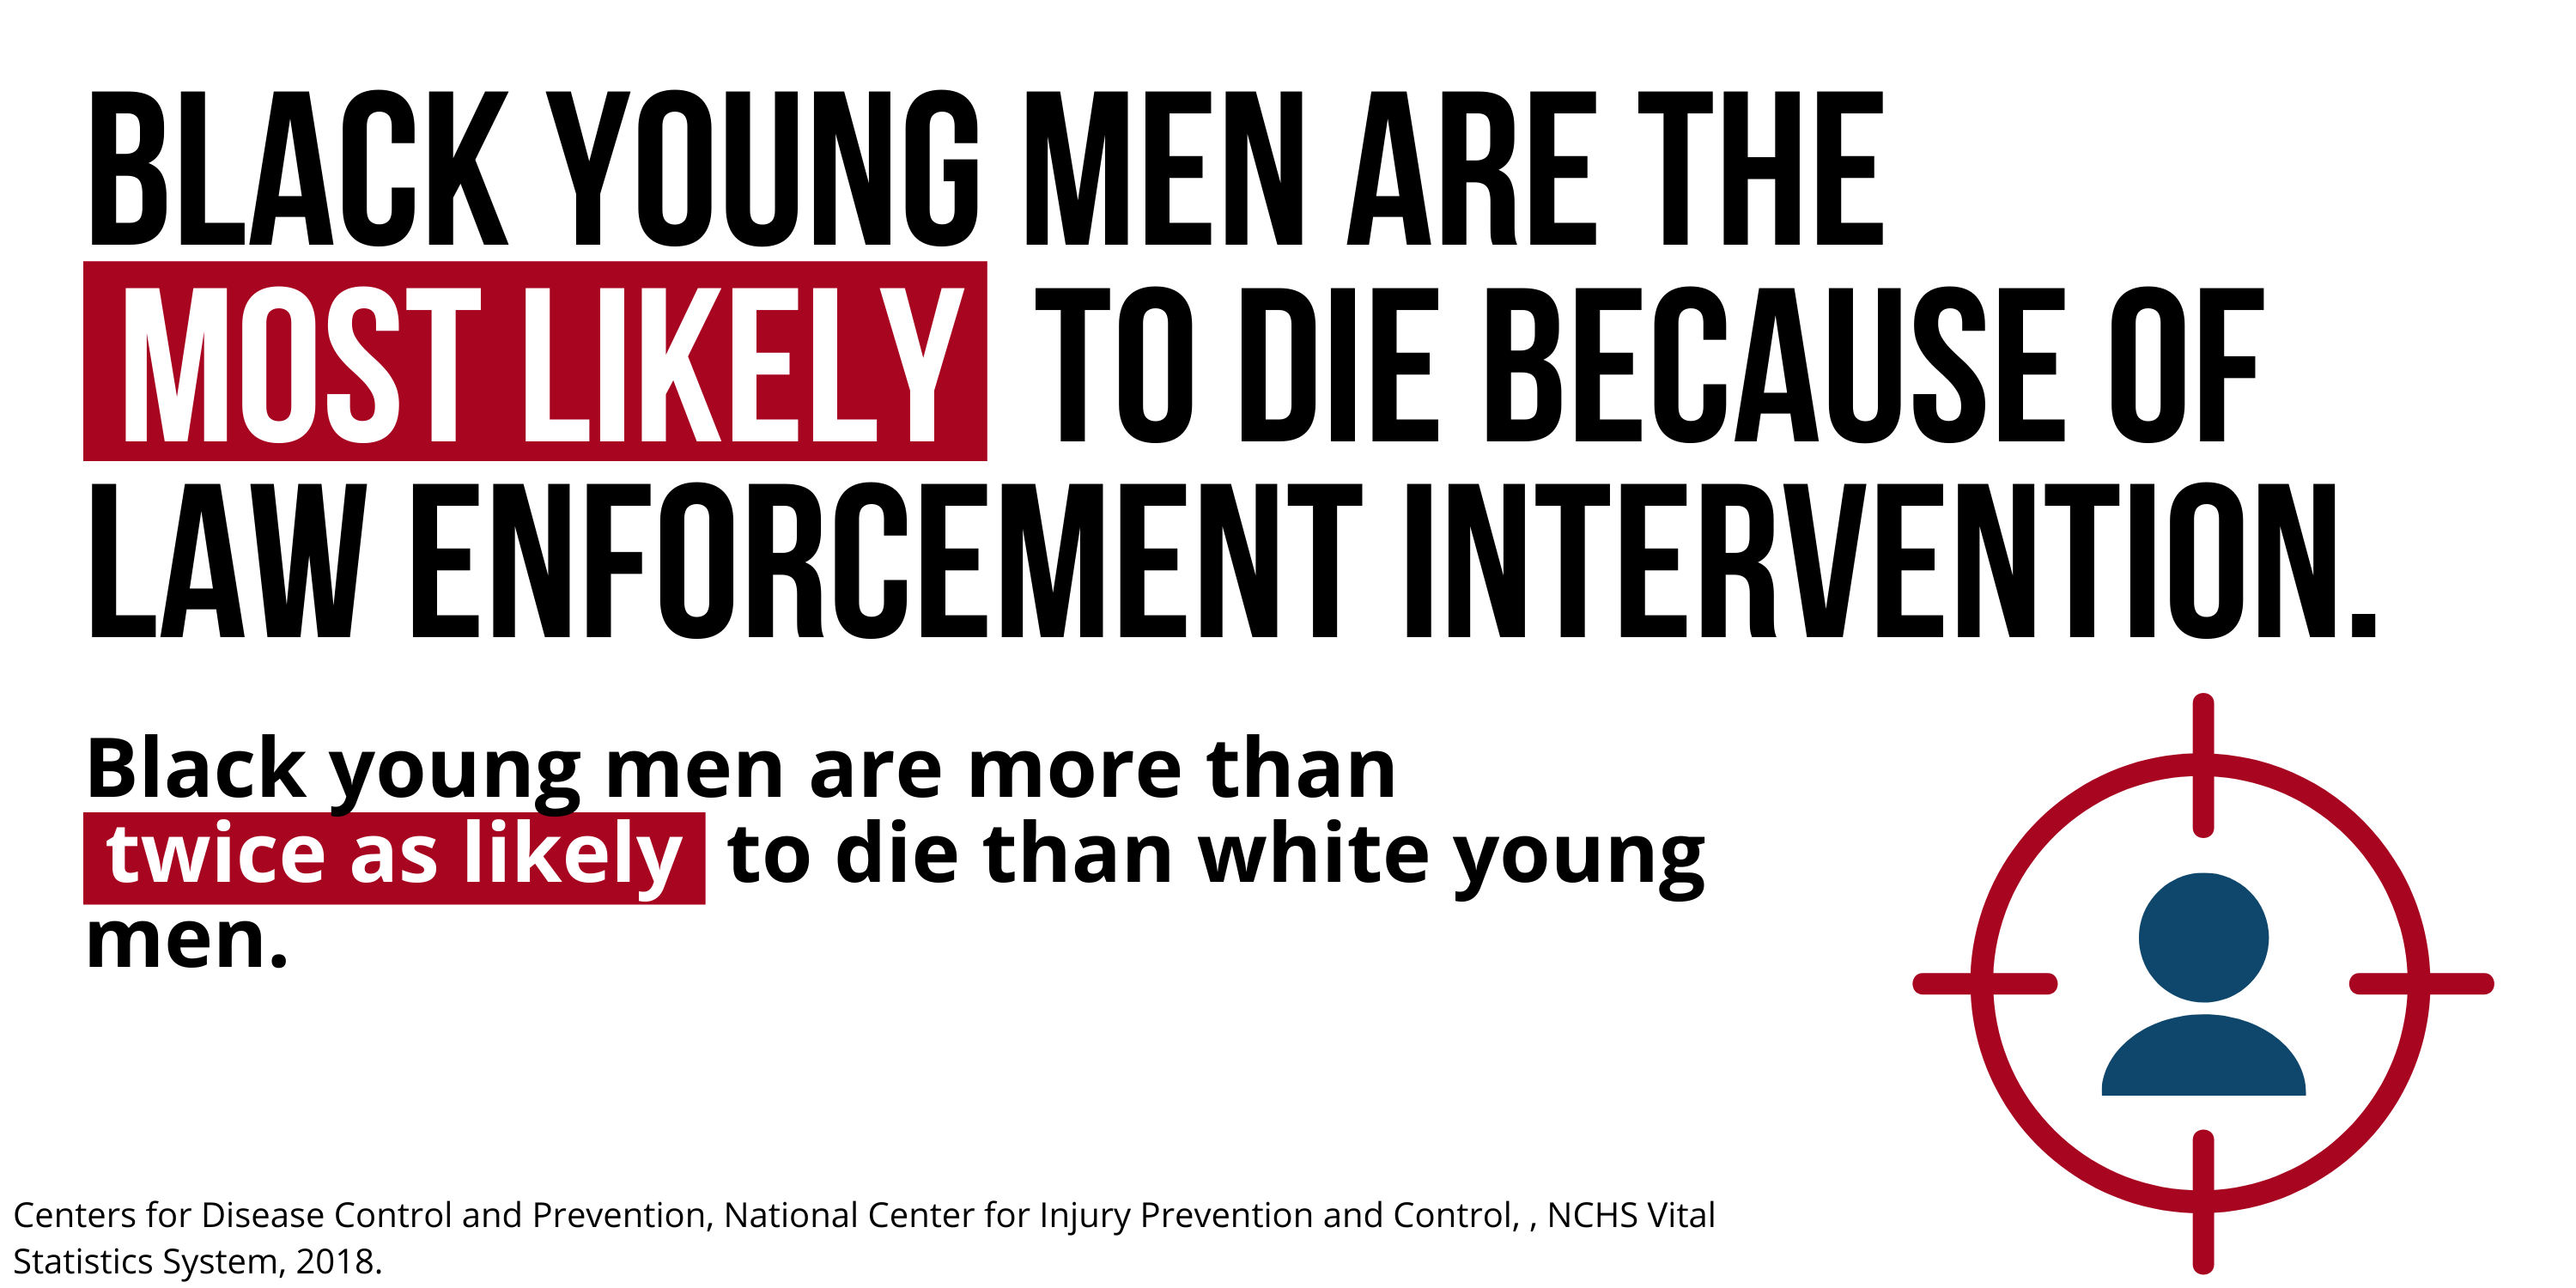 Black young men are the most likely to die because of law enforcement intervention.